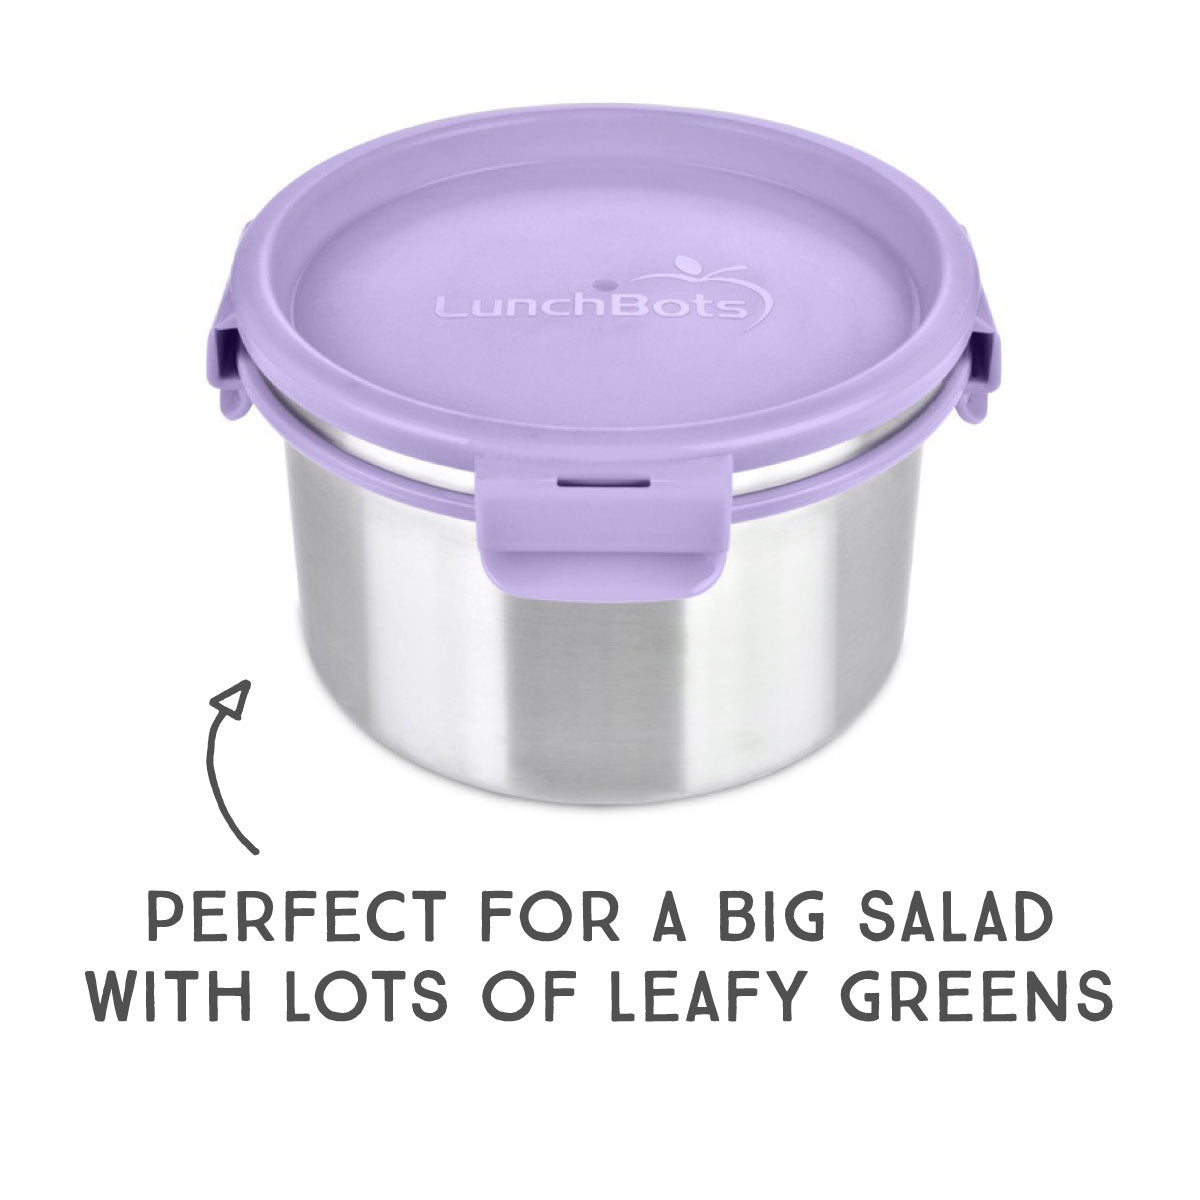 6 Cup Bowl, Salad Bowl, Leak-Proof To-Go Container LunchBots Lid Color: Lavender